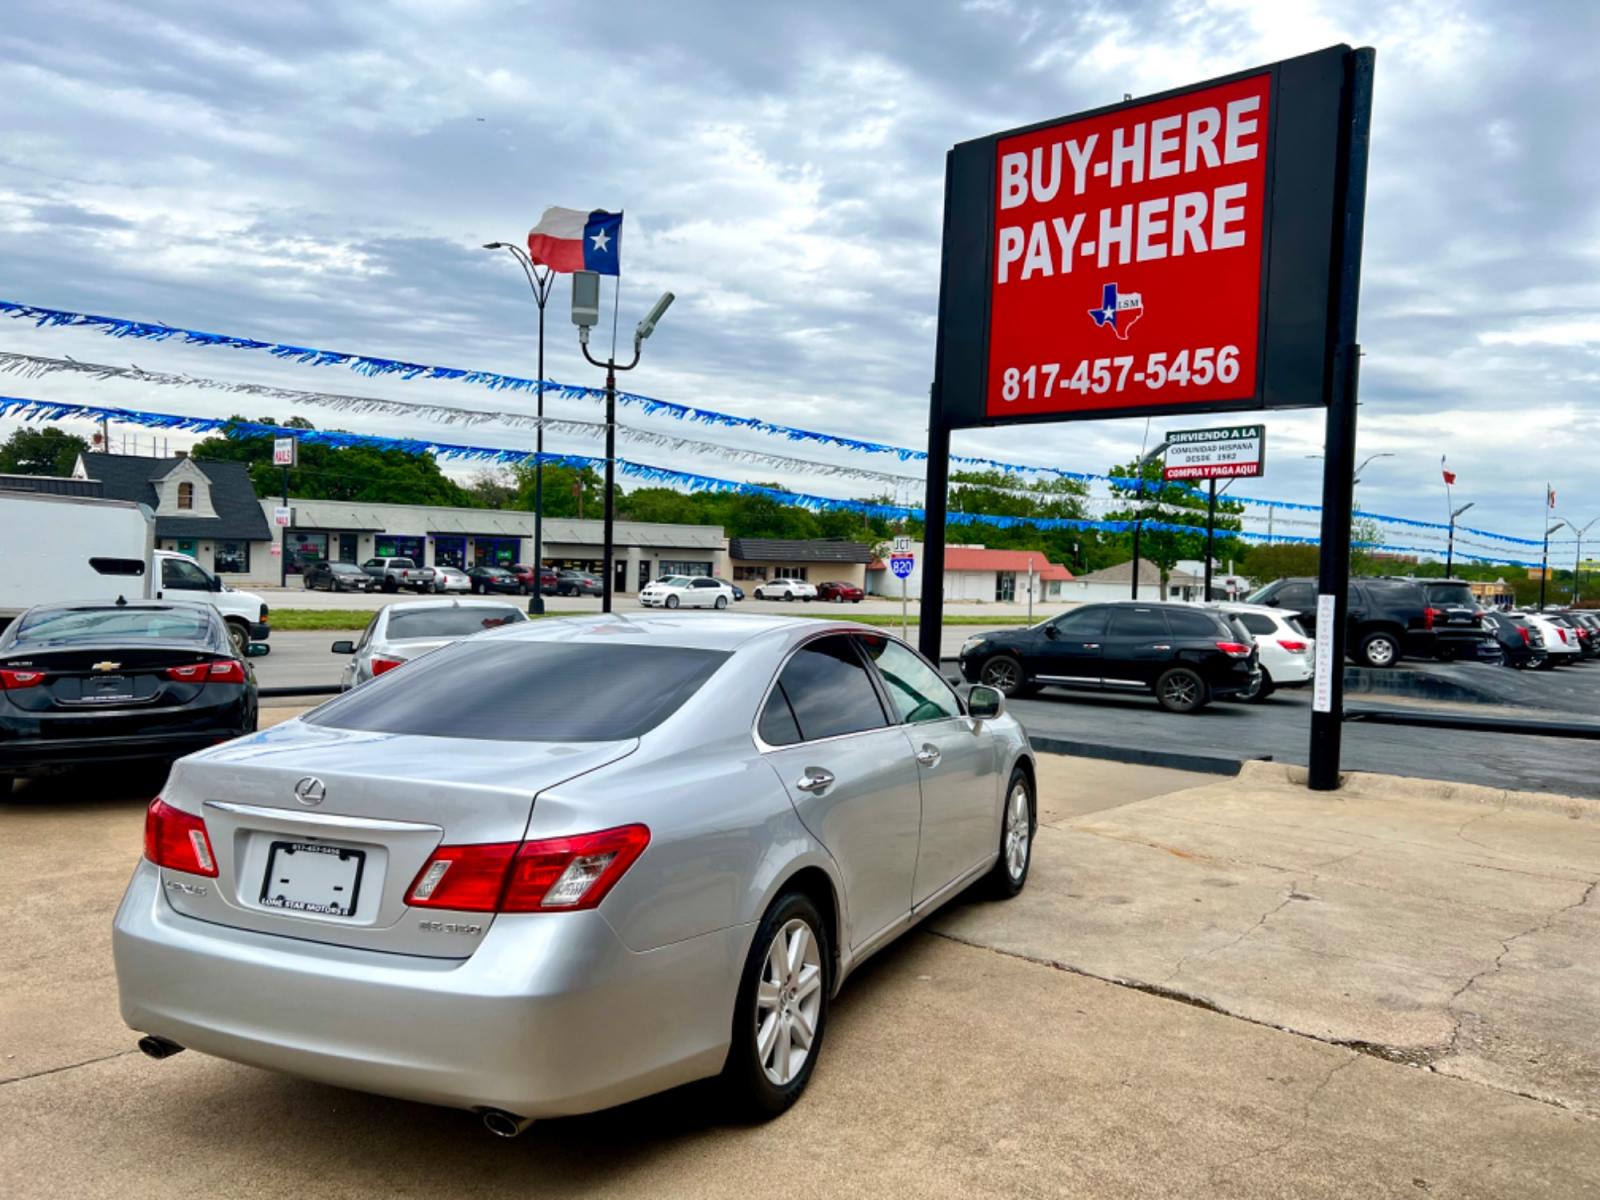 2007 SILVER LEXUS ES 350 BASE (JTHBJ46G072) , located at 5900 E. Lancaster Ave., Fort Worth, TX, 76112, (817) 457-5456, 0.000000, 0.000000 - CASH CAR ONLY, NO FINANCING AVAILABLE. THIS 2007 LEXUS ES 350 BASE 4 DOOR SEDAN RUNS AND DRIVES GREAT. IT IS EQUIPPED WITH A CD PLAYER, AM/FM RADIO AND AN AUX PORT. THE TIRES ARE IN GOOD CONDITION AND STILL HAVE TREAD LEFT ON THEM. THIS CAR WILL NOT LAST SO ACT FAST! Call or text Frances at 68 - Photo #6